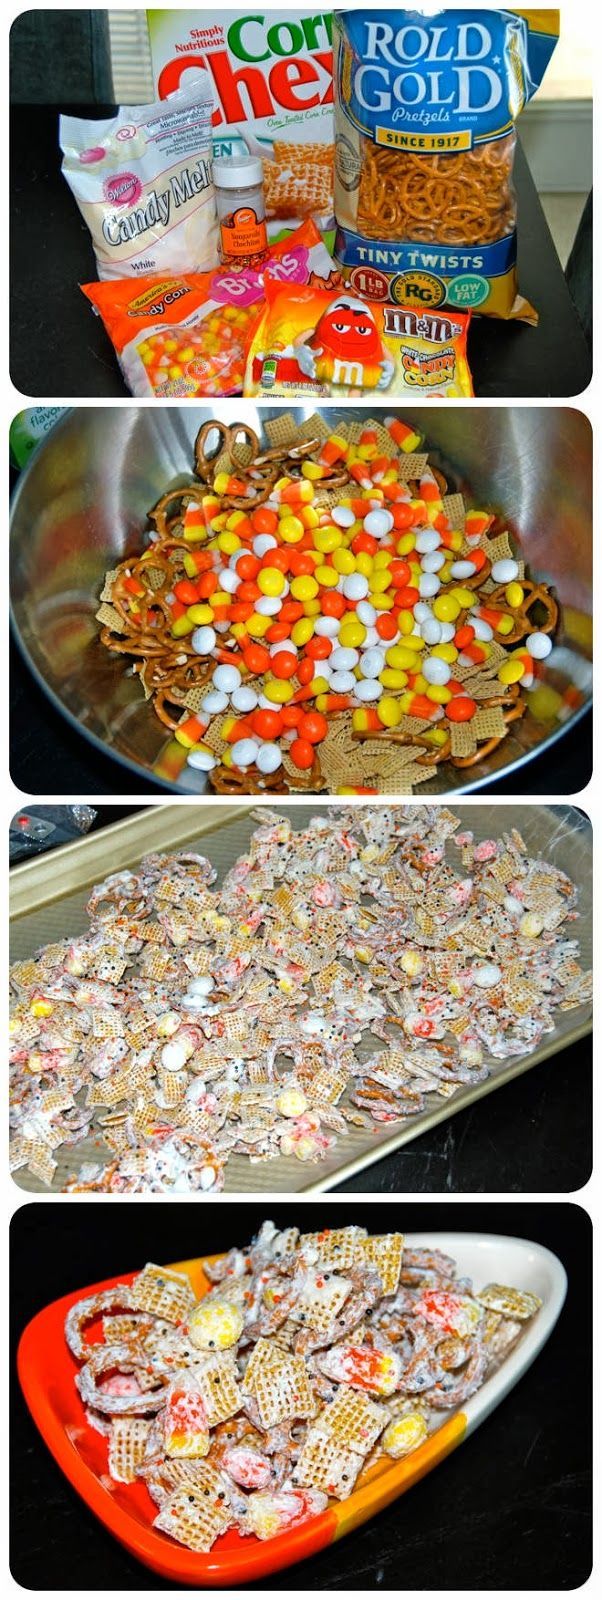 Normal Recipe: Halloween Chex Mix, only I will use regular M&M's. I don't like the candy corn flavor.